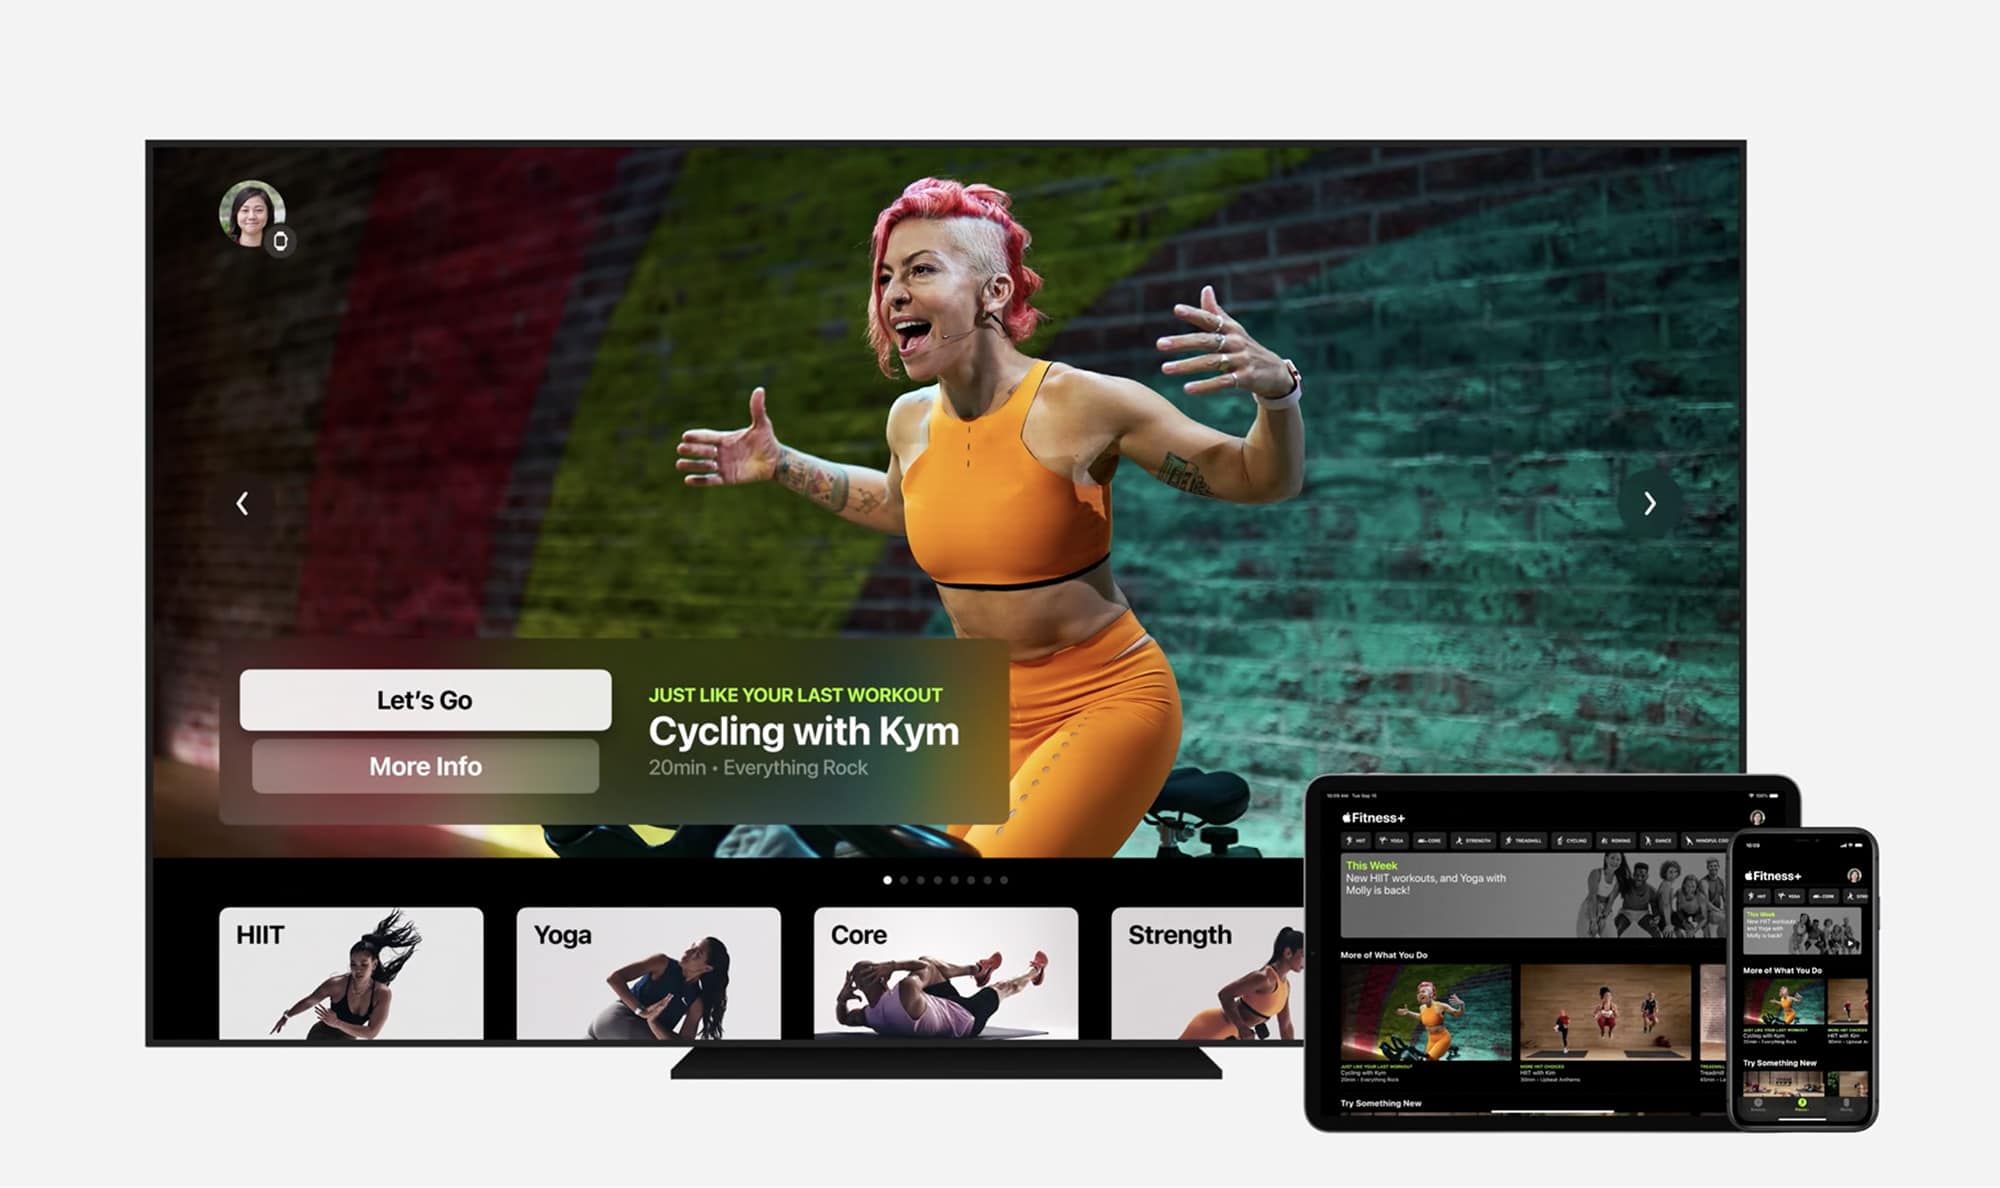 Apple Fitness+ will be available on iPhone, iPad and Apple TV.